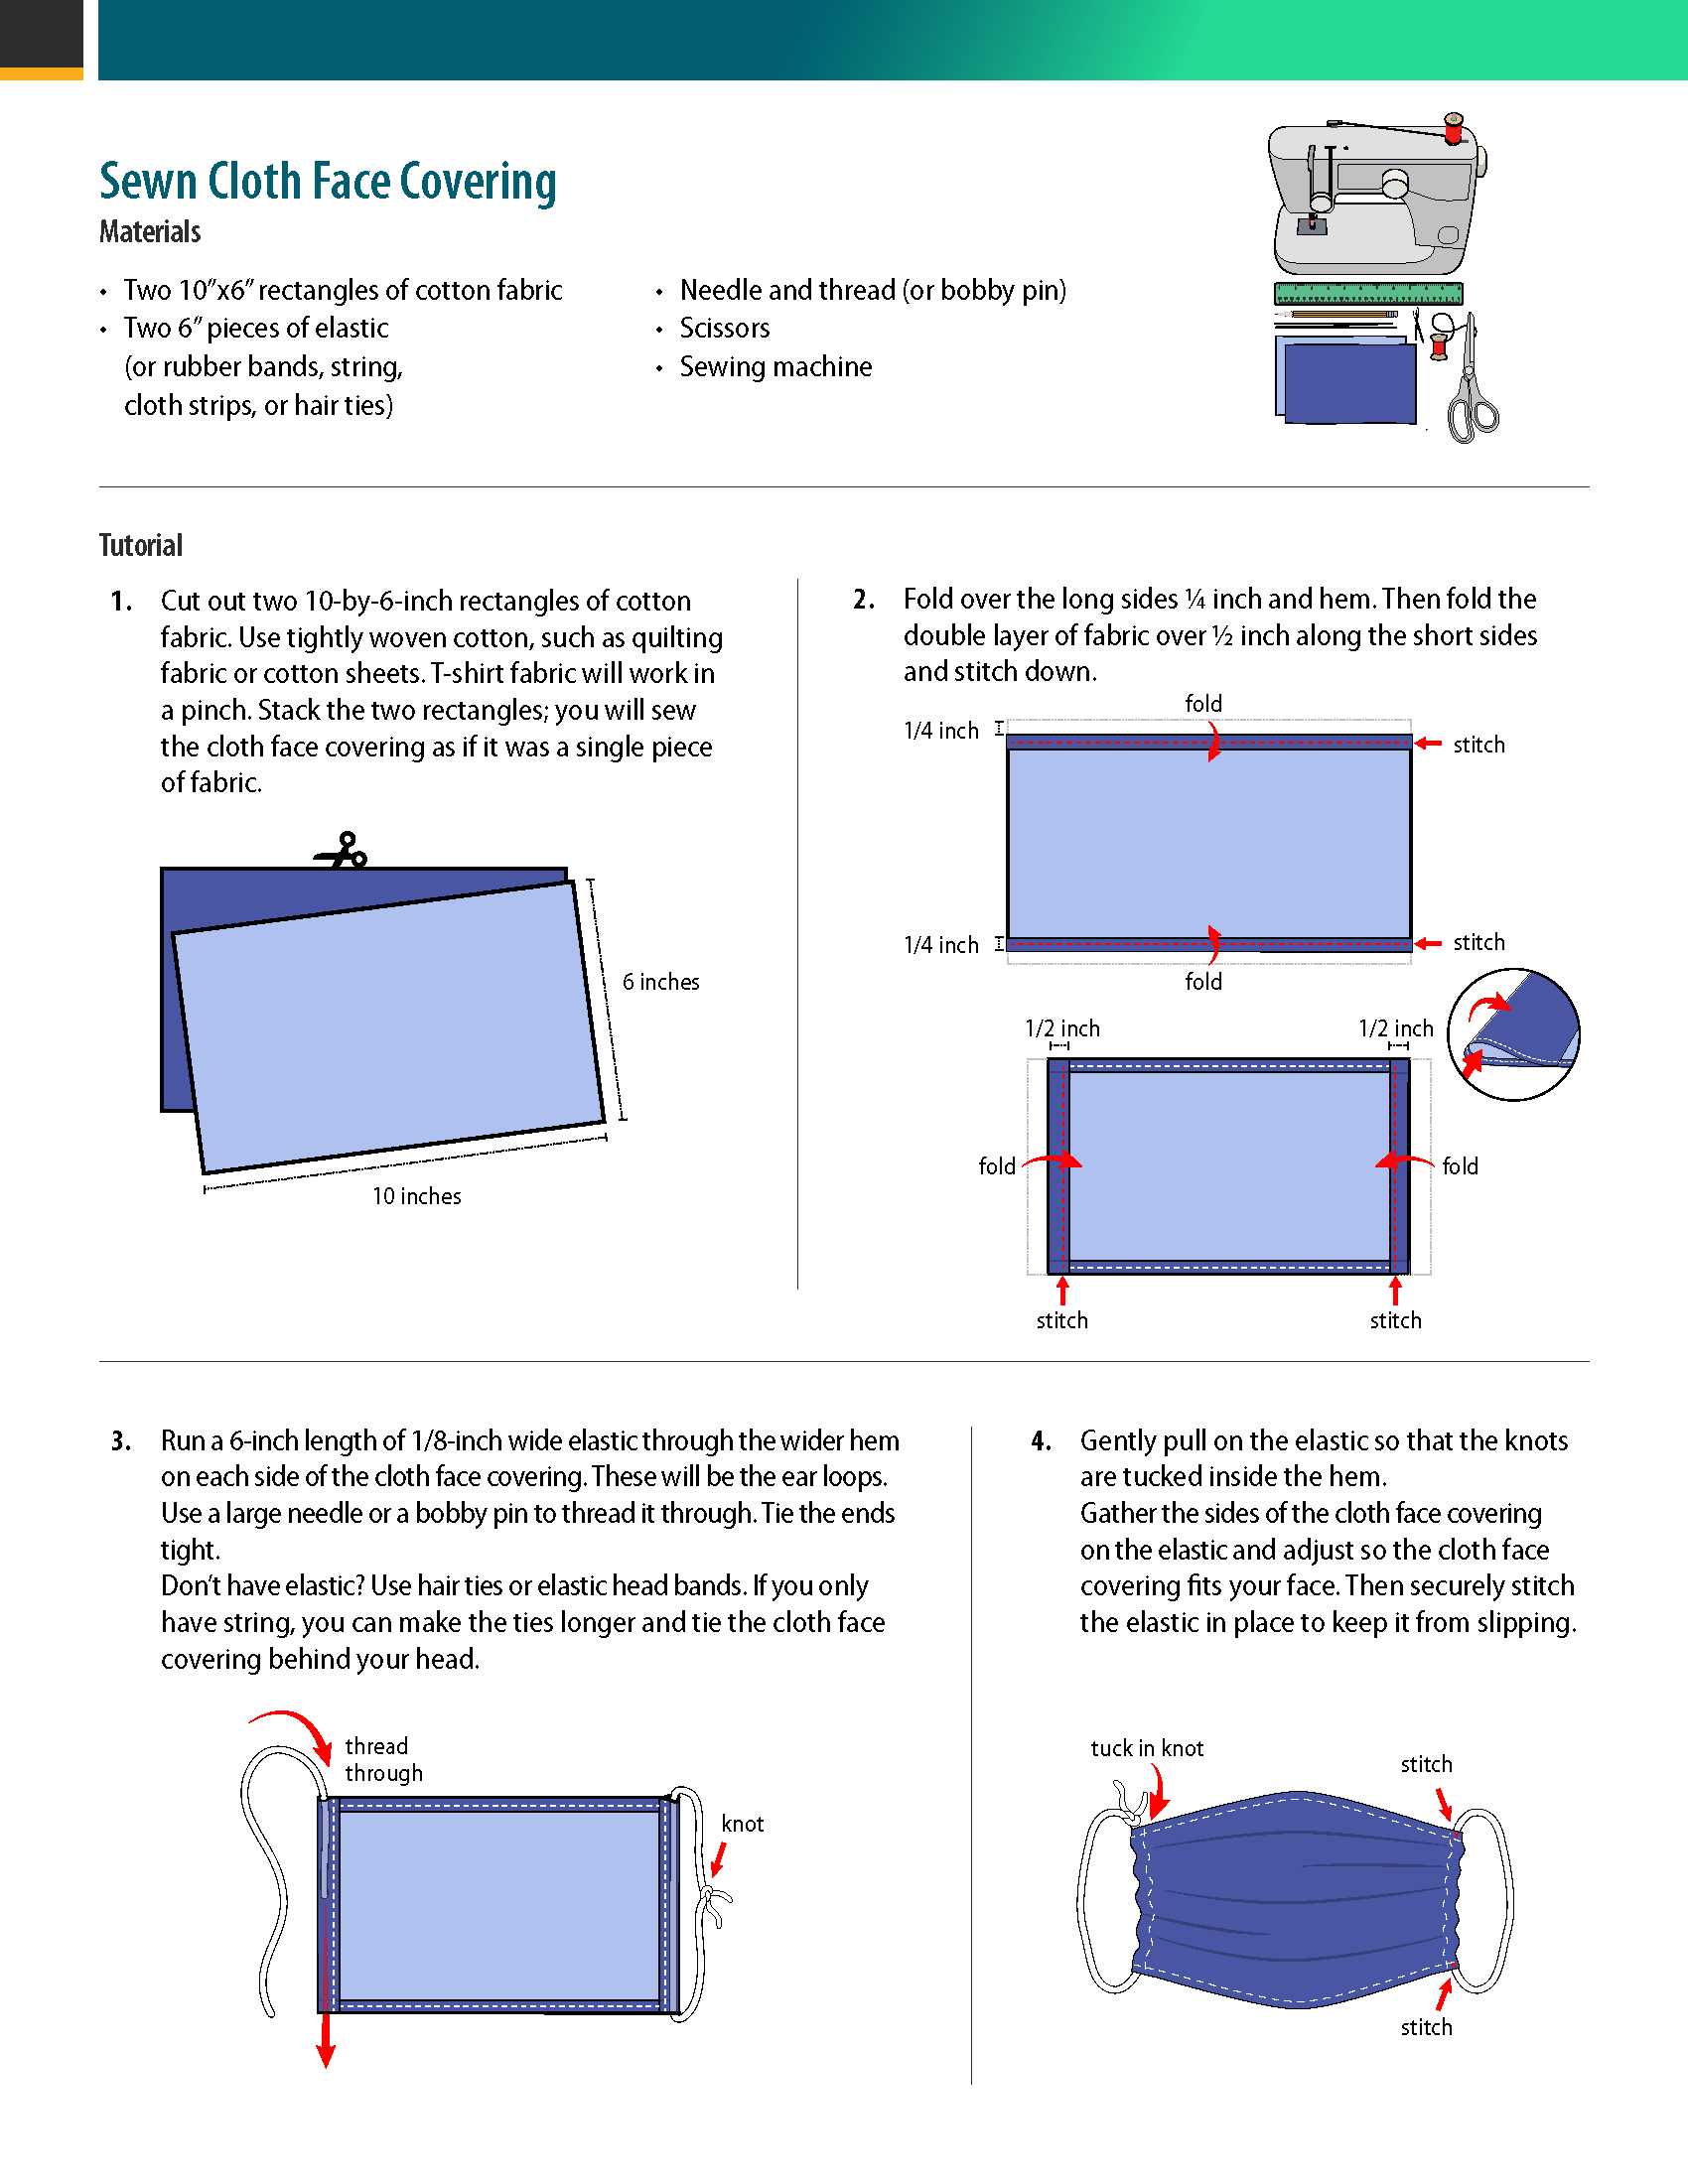 Swen cloth face covering instructions